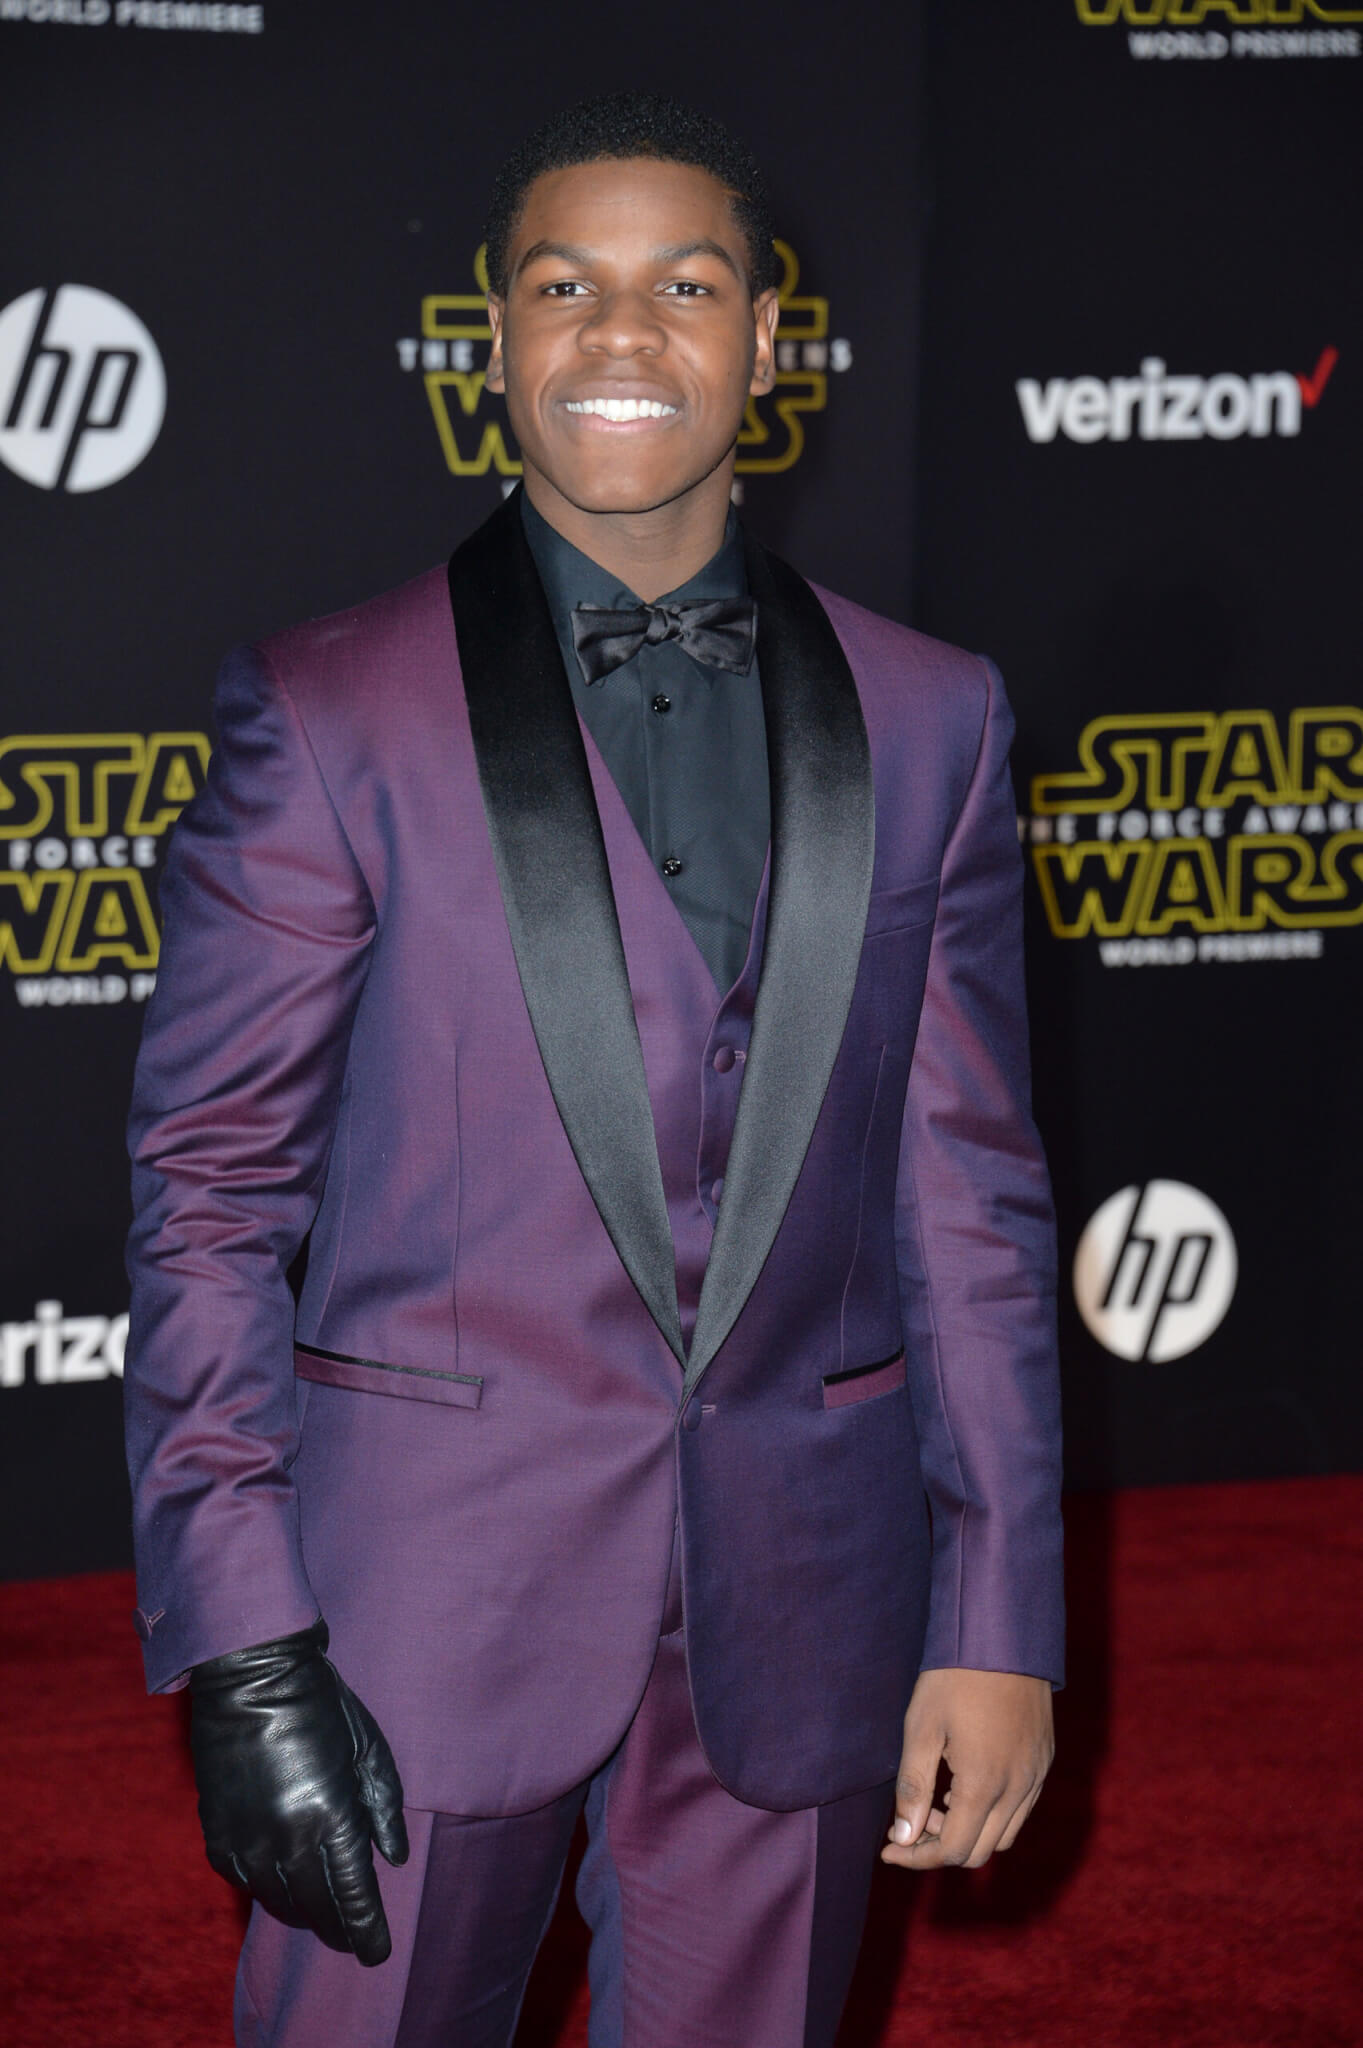 John Boyega at the world premiere of "Star Wars: The Force Awakens" in 2015